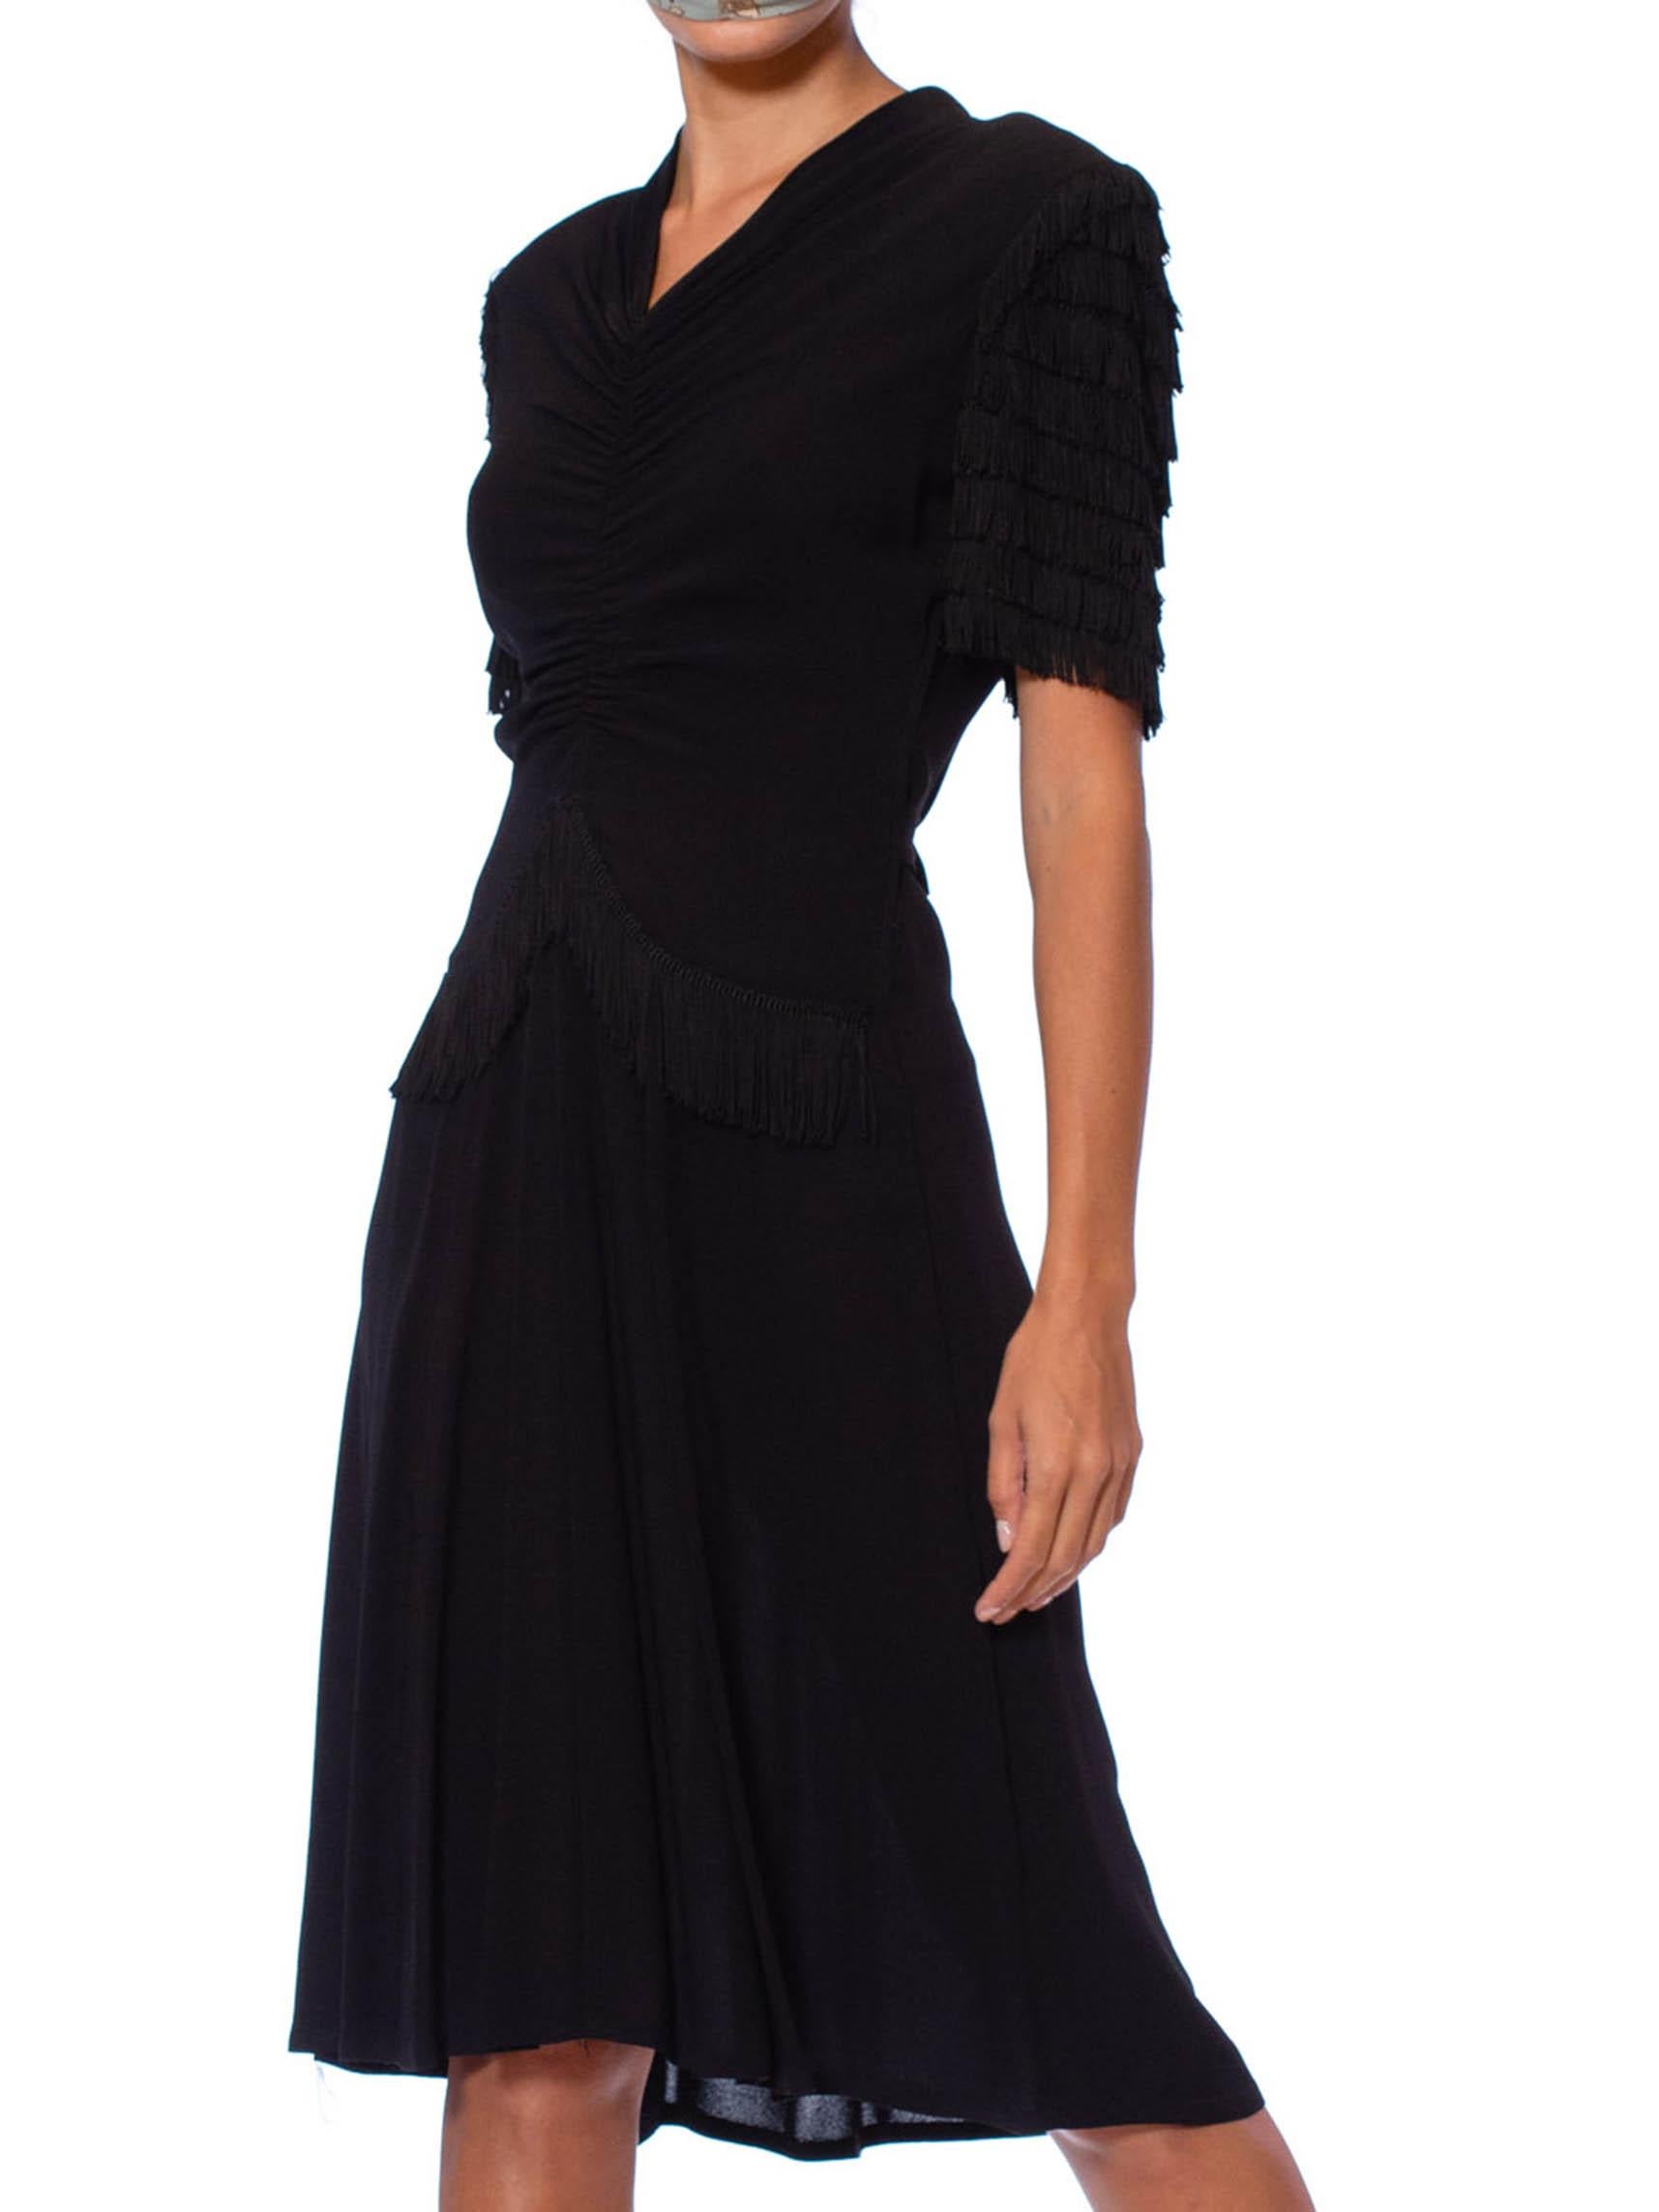 1940S Black Rayon Crepe Shirred Front Dress With Fringe Sleeves For Sale 4